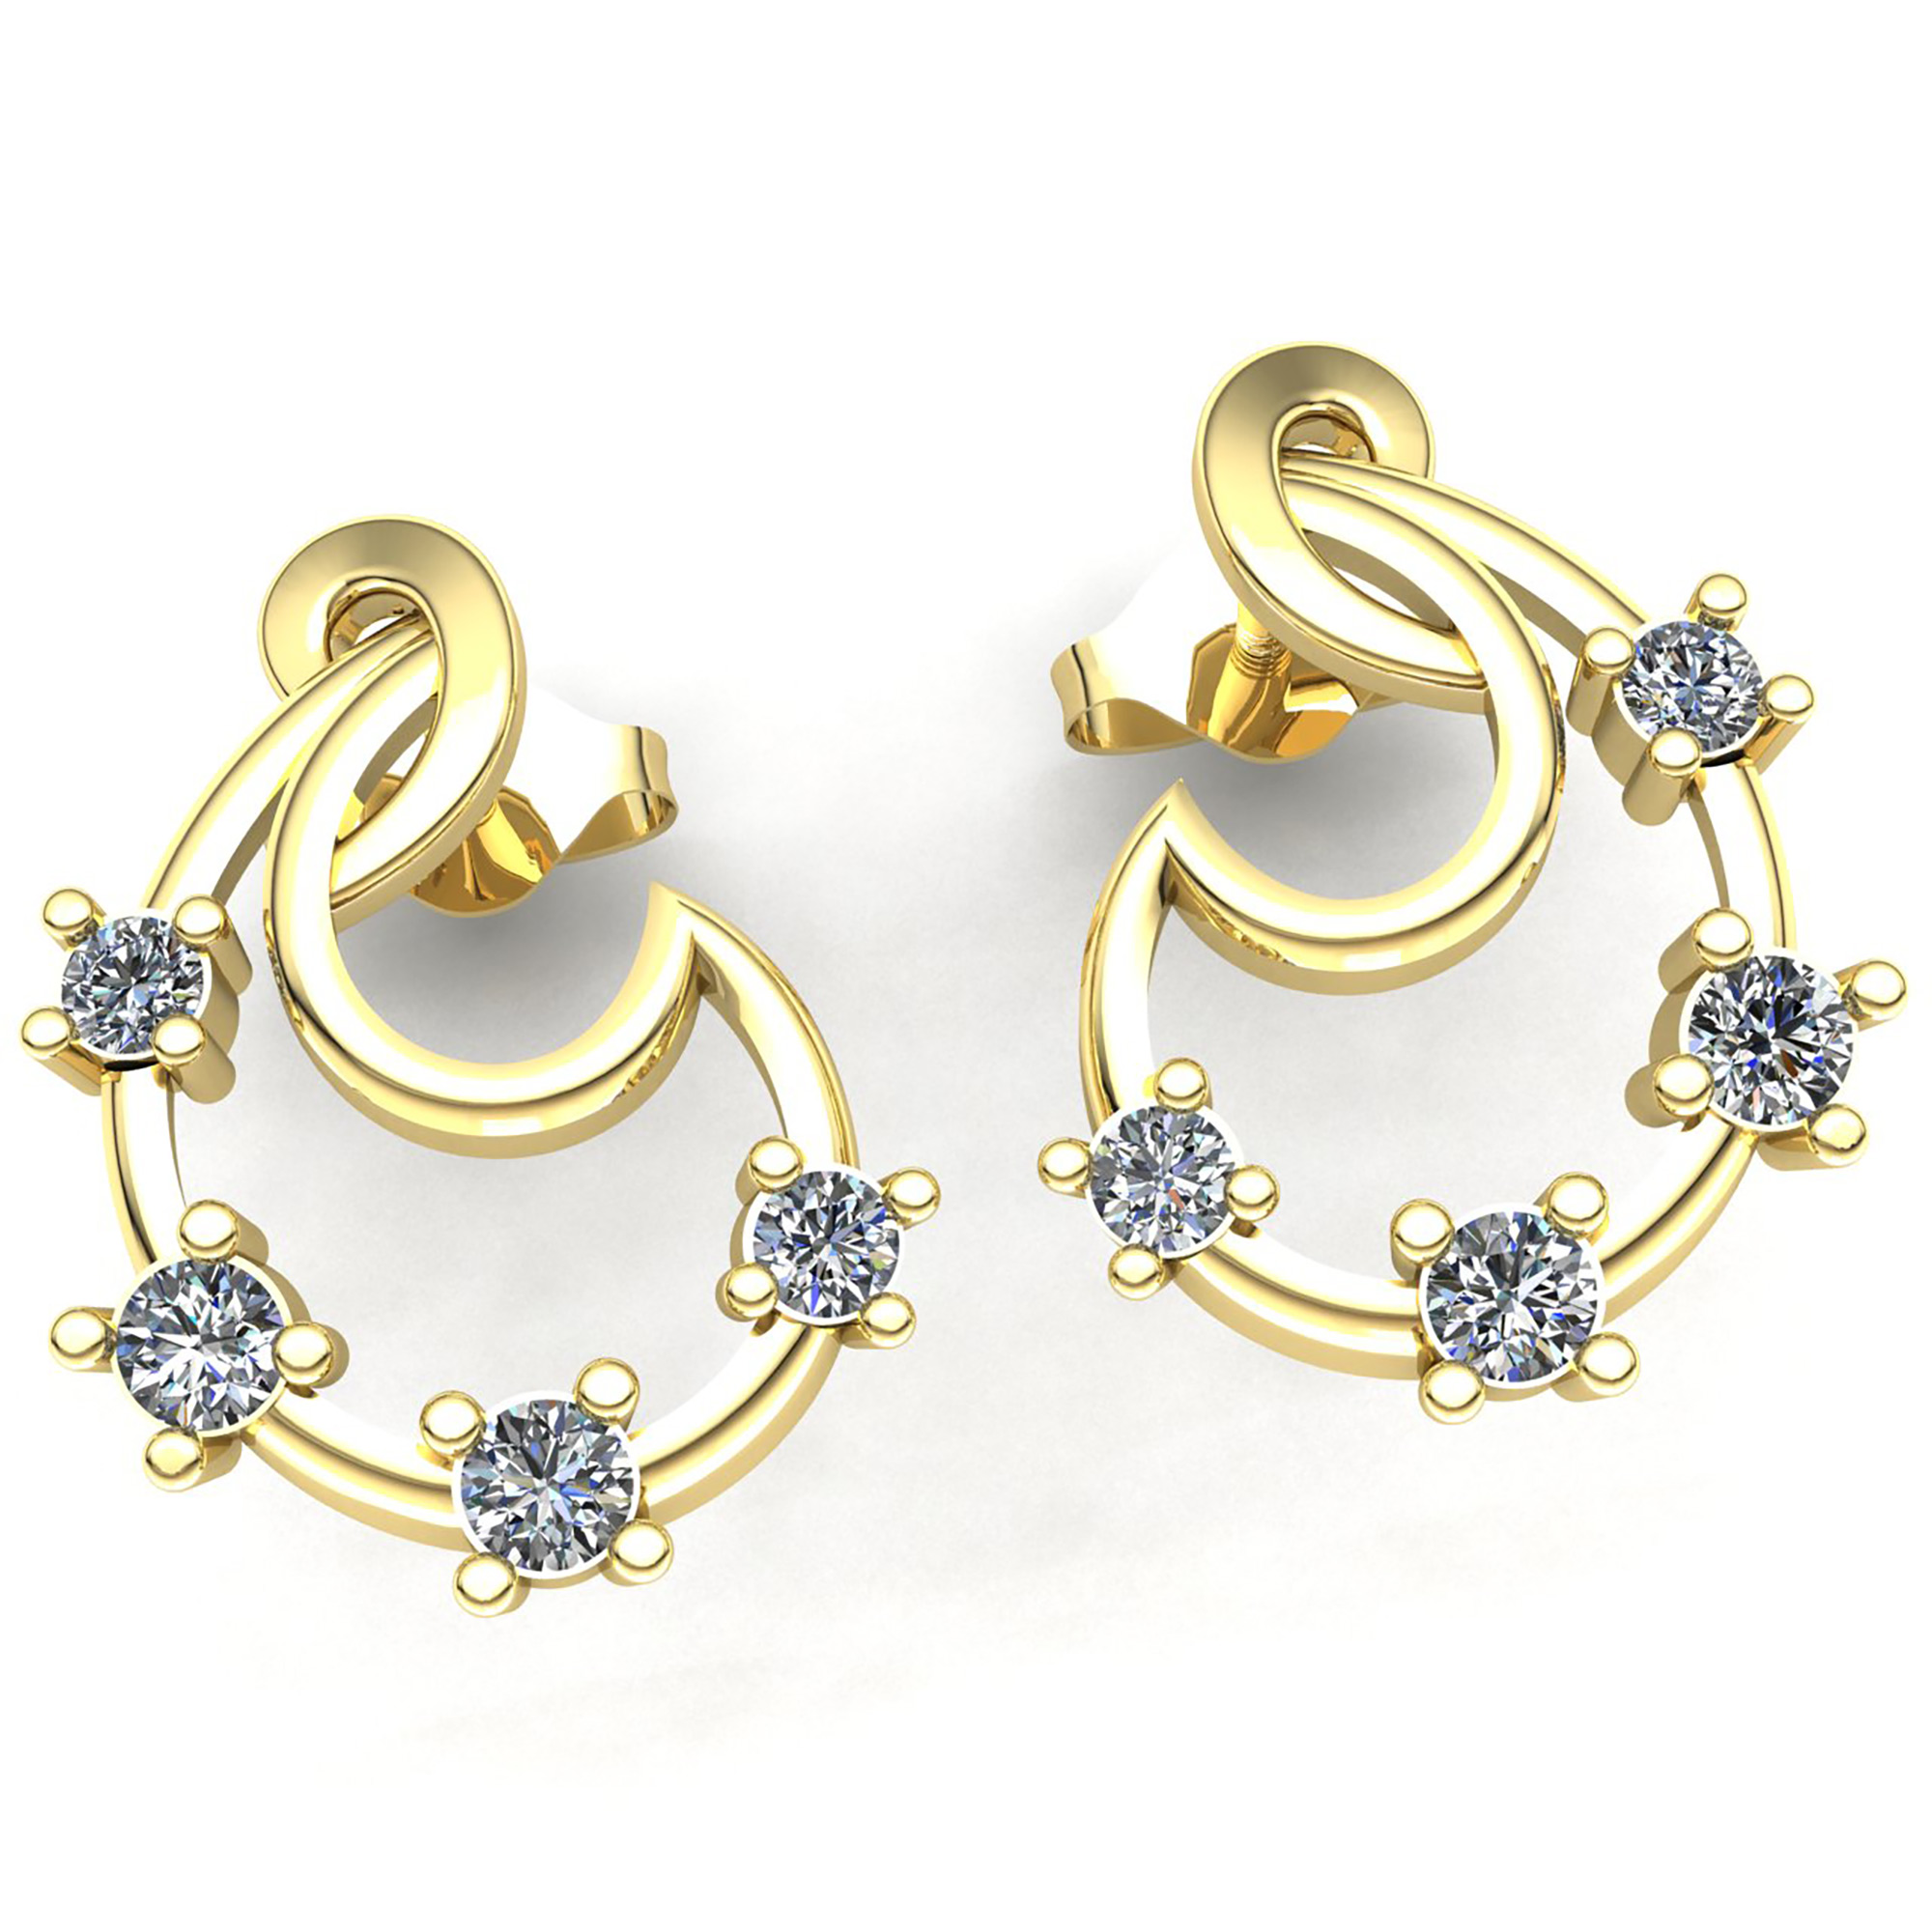 Jewel We Sell 0.75ct Round Cut Not Enhanced Diamond Ladies Fancy Earrings 14K White, Yellow or Rose Gold GH SI1